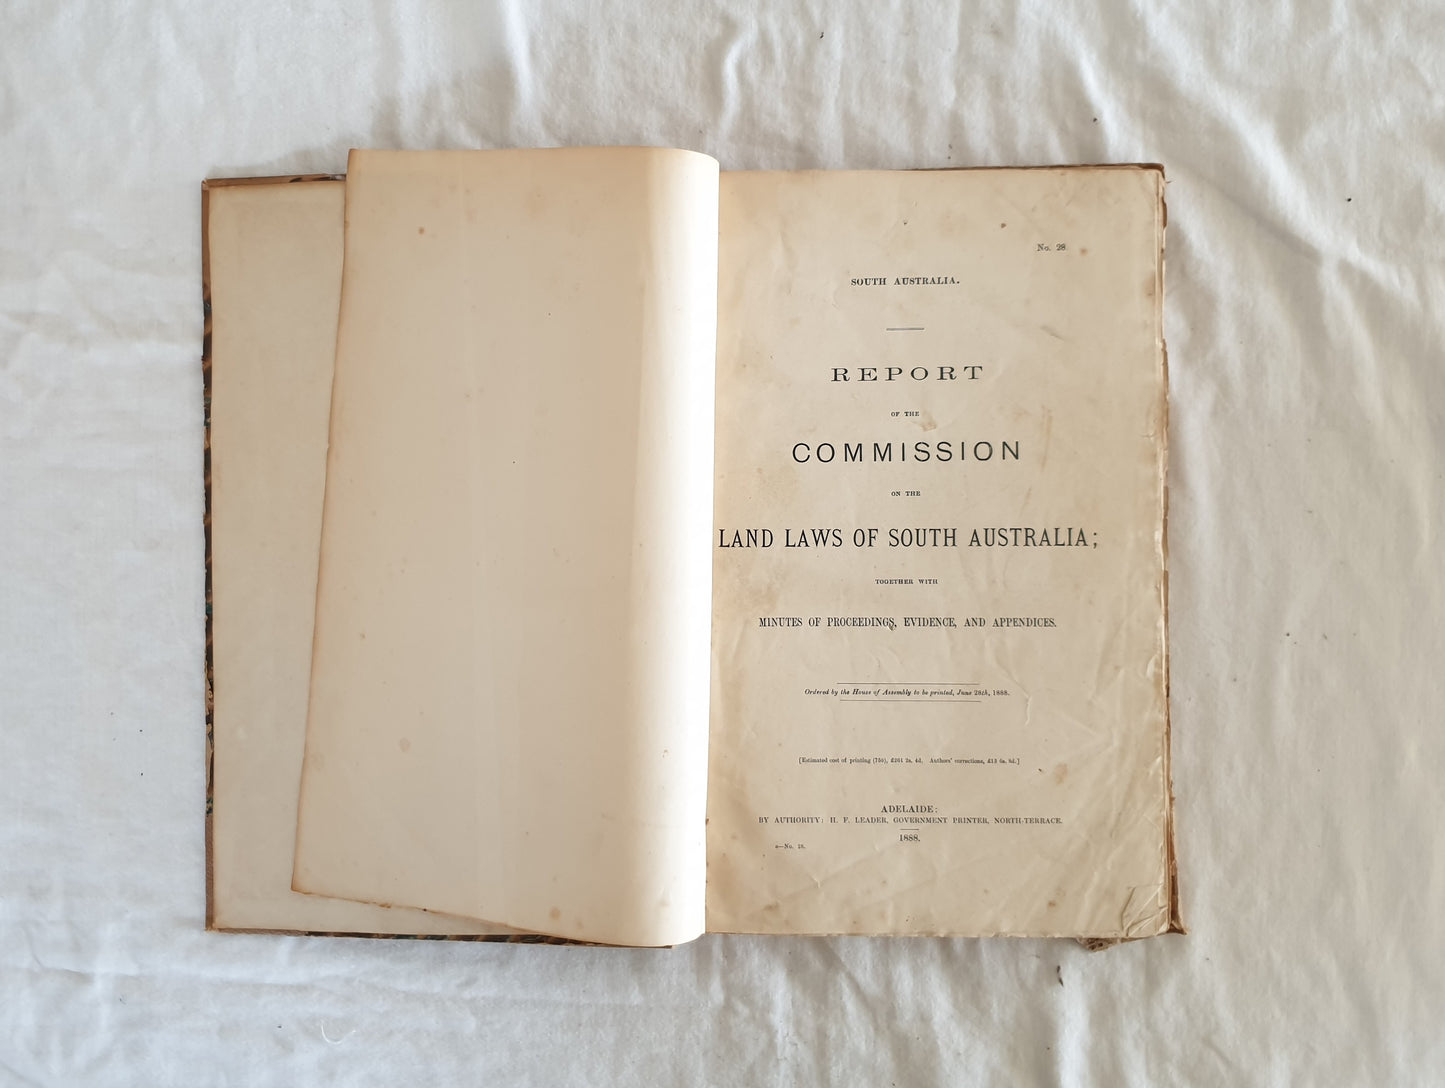 Report of the Commission on the Land Laws of South Australia